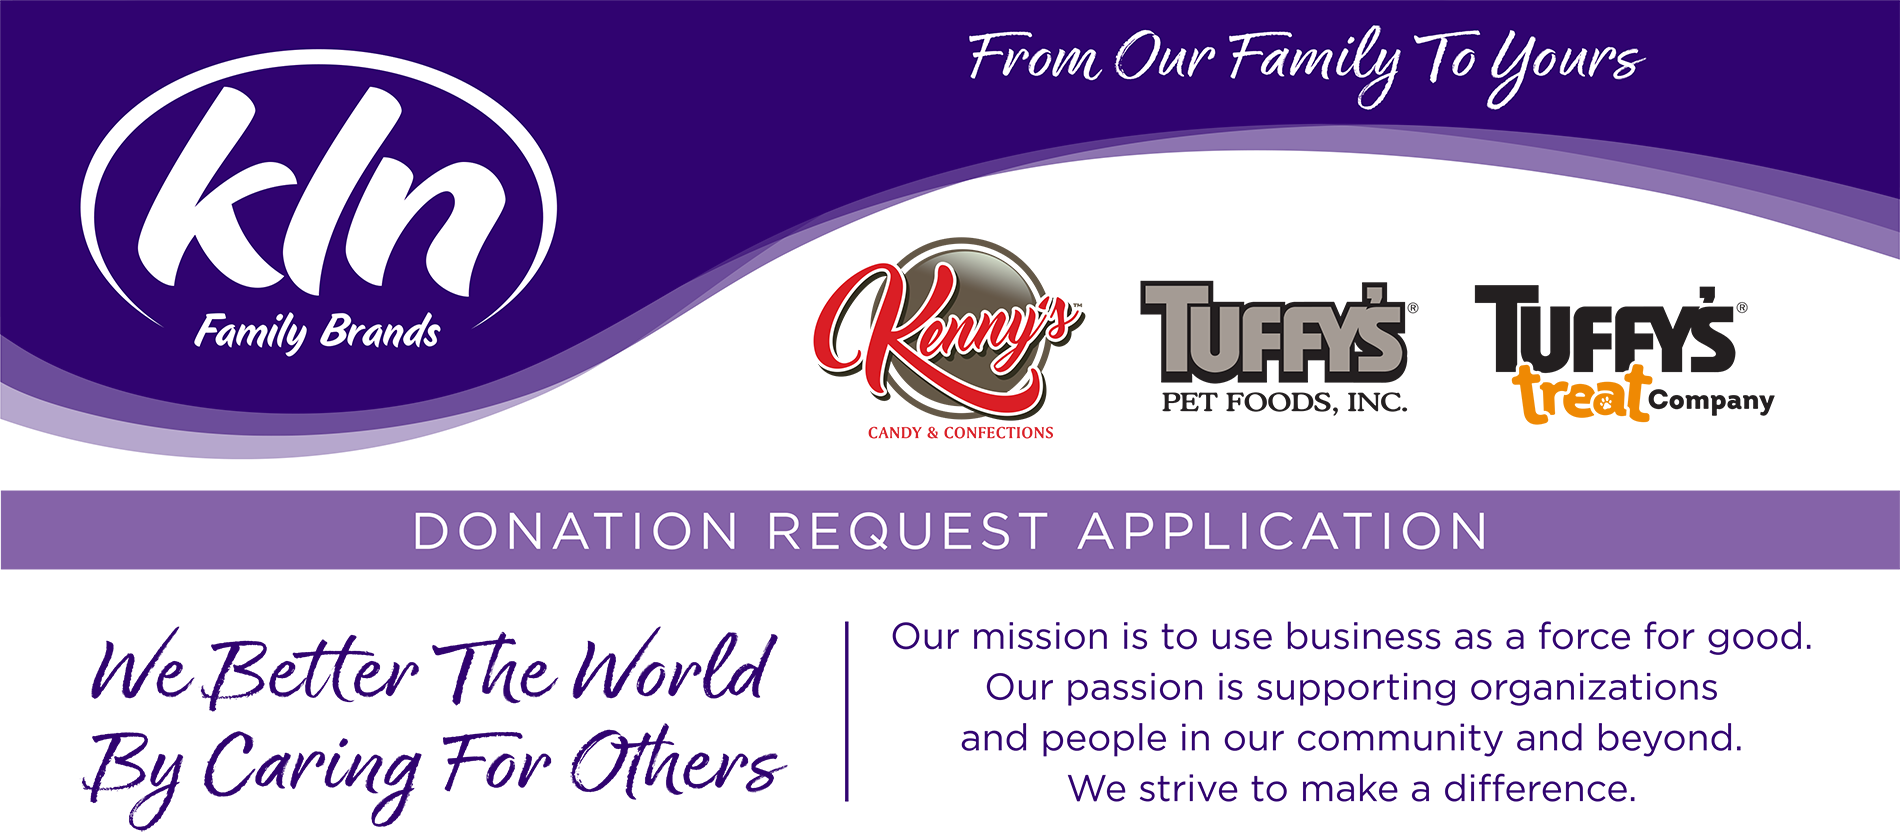 DONATION REQUEST APPLICATION: We Better The World By Caring For Others | Our mission is to use businesses as a force for good. Our passion is supporting organizations and people in our community and beyond. We strive to make a difference.